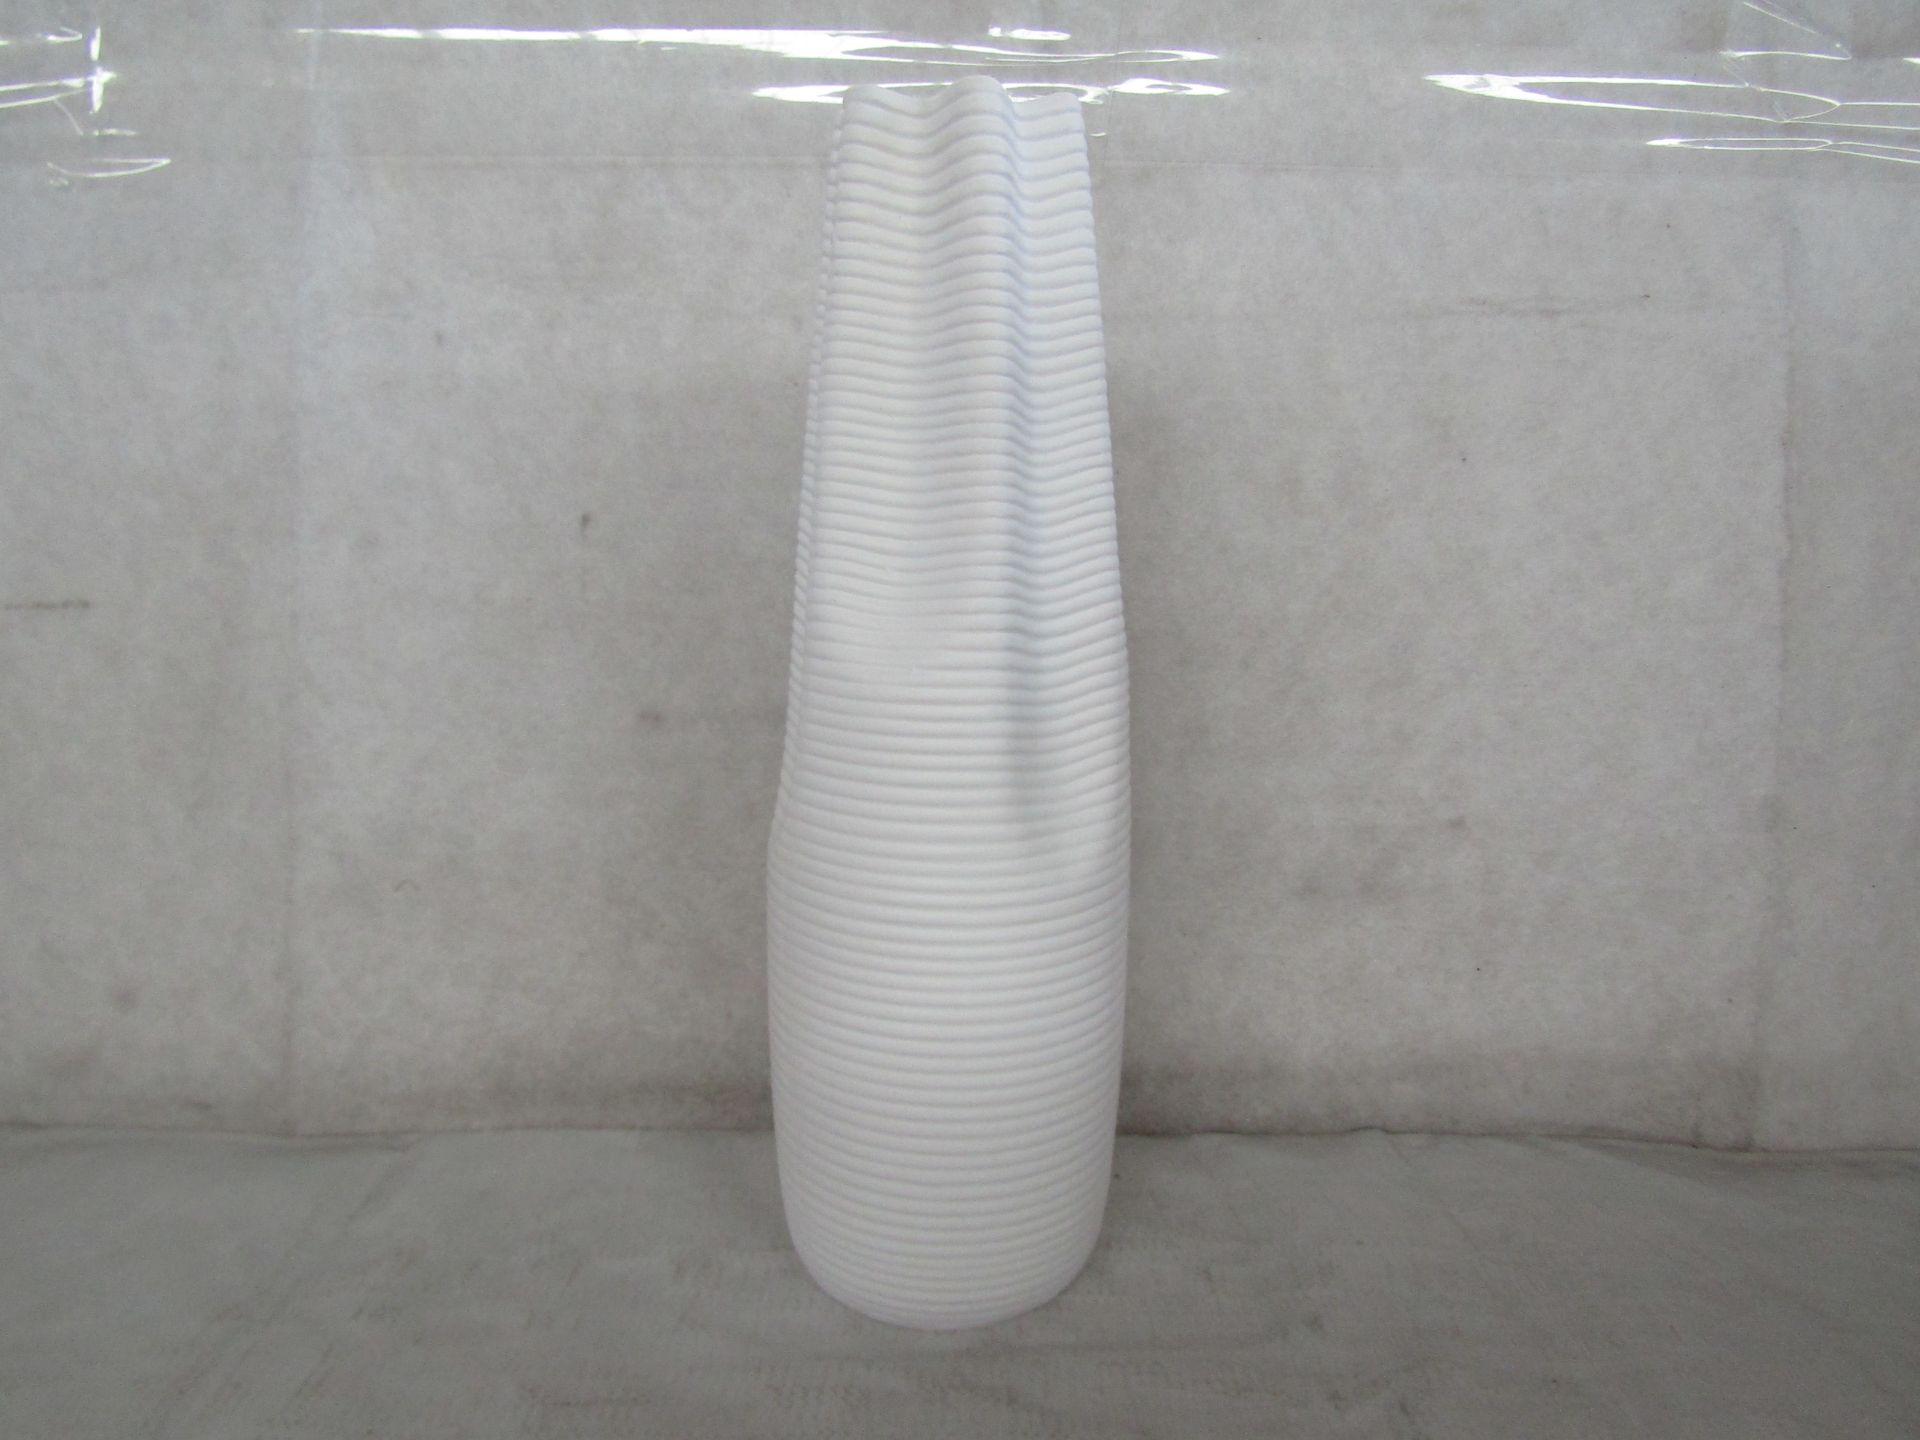 David Fischoff - White Ribbed Vase - Good Condition & Boxed.